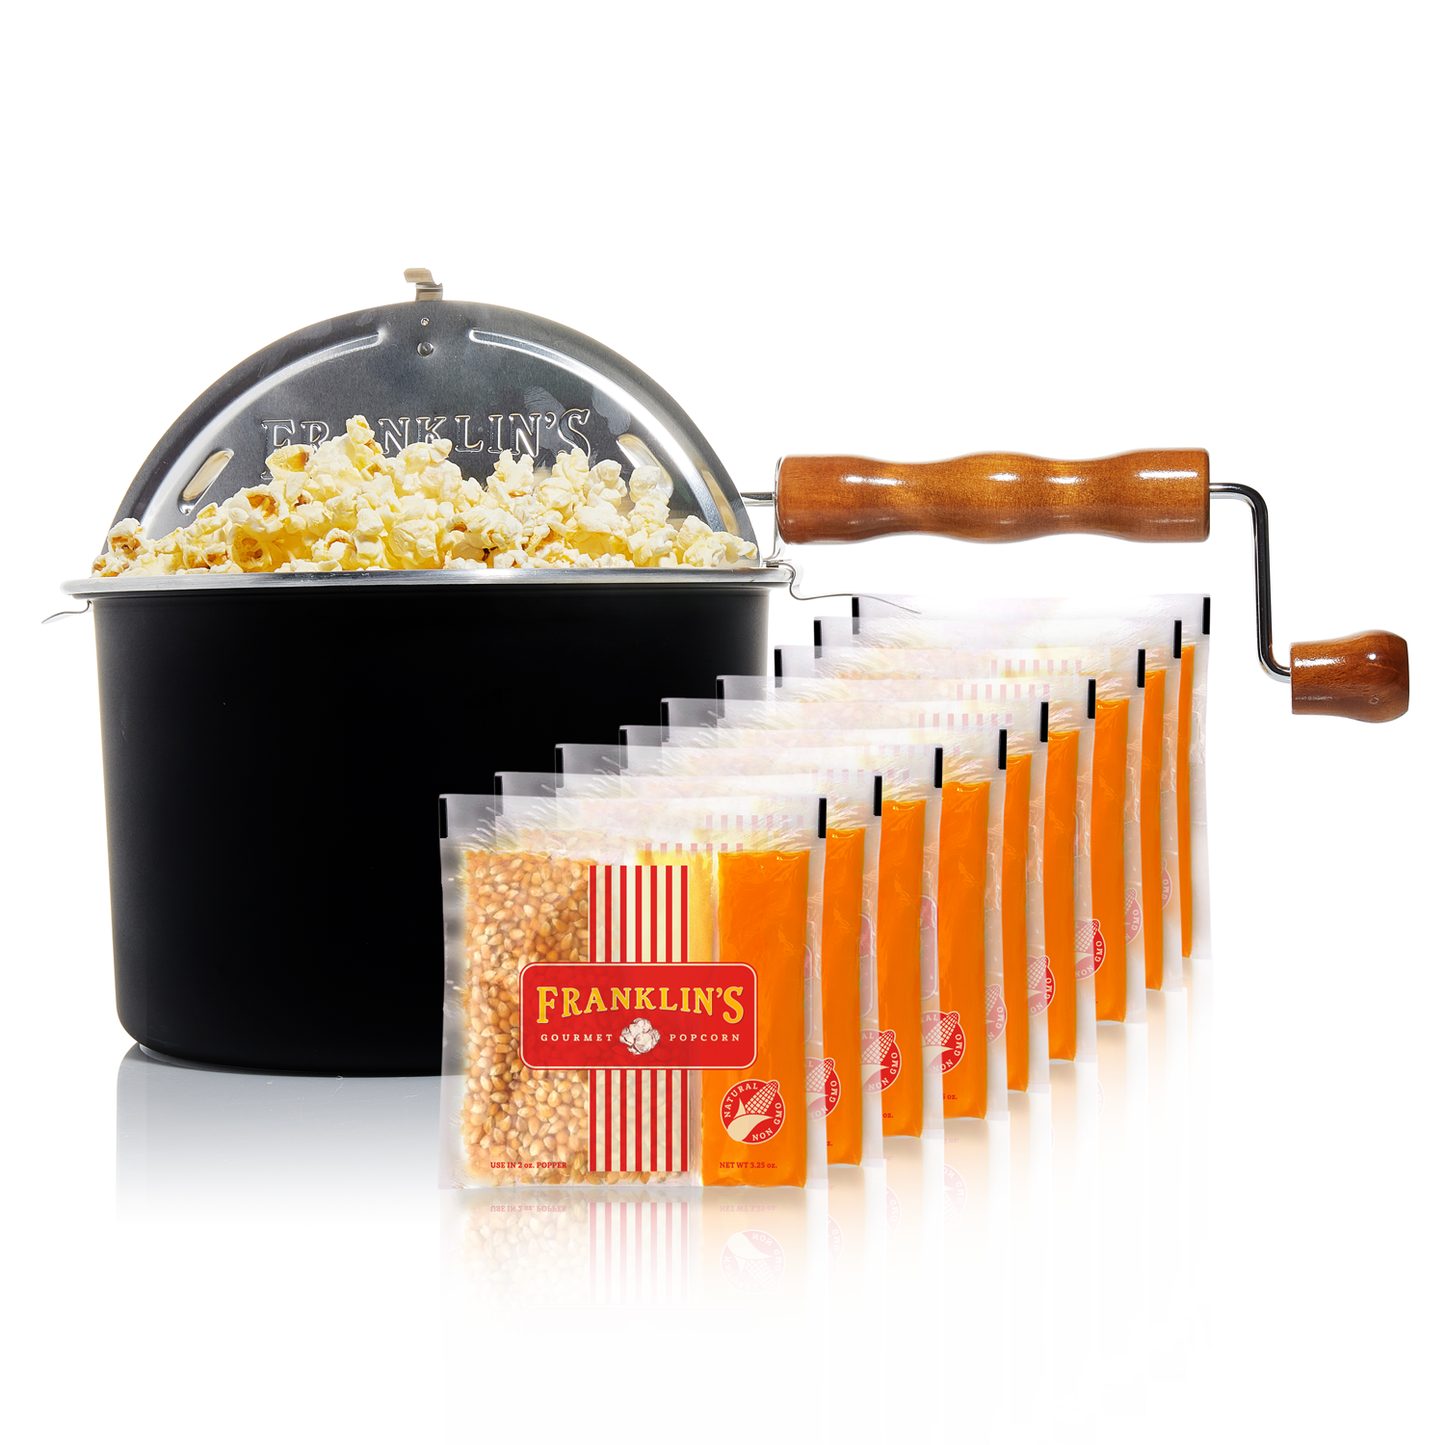 The 7 Best Popcorn Makers for Theater-Level Popcorn at Home